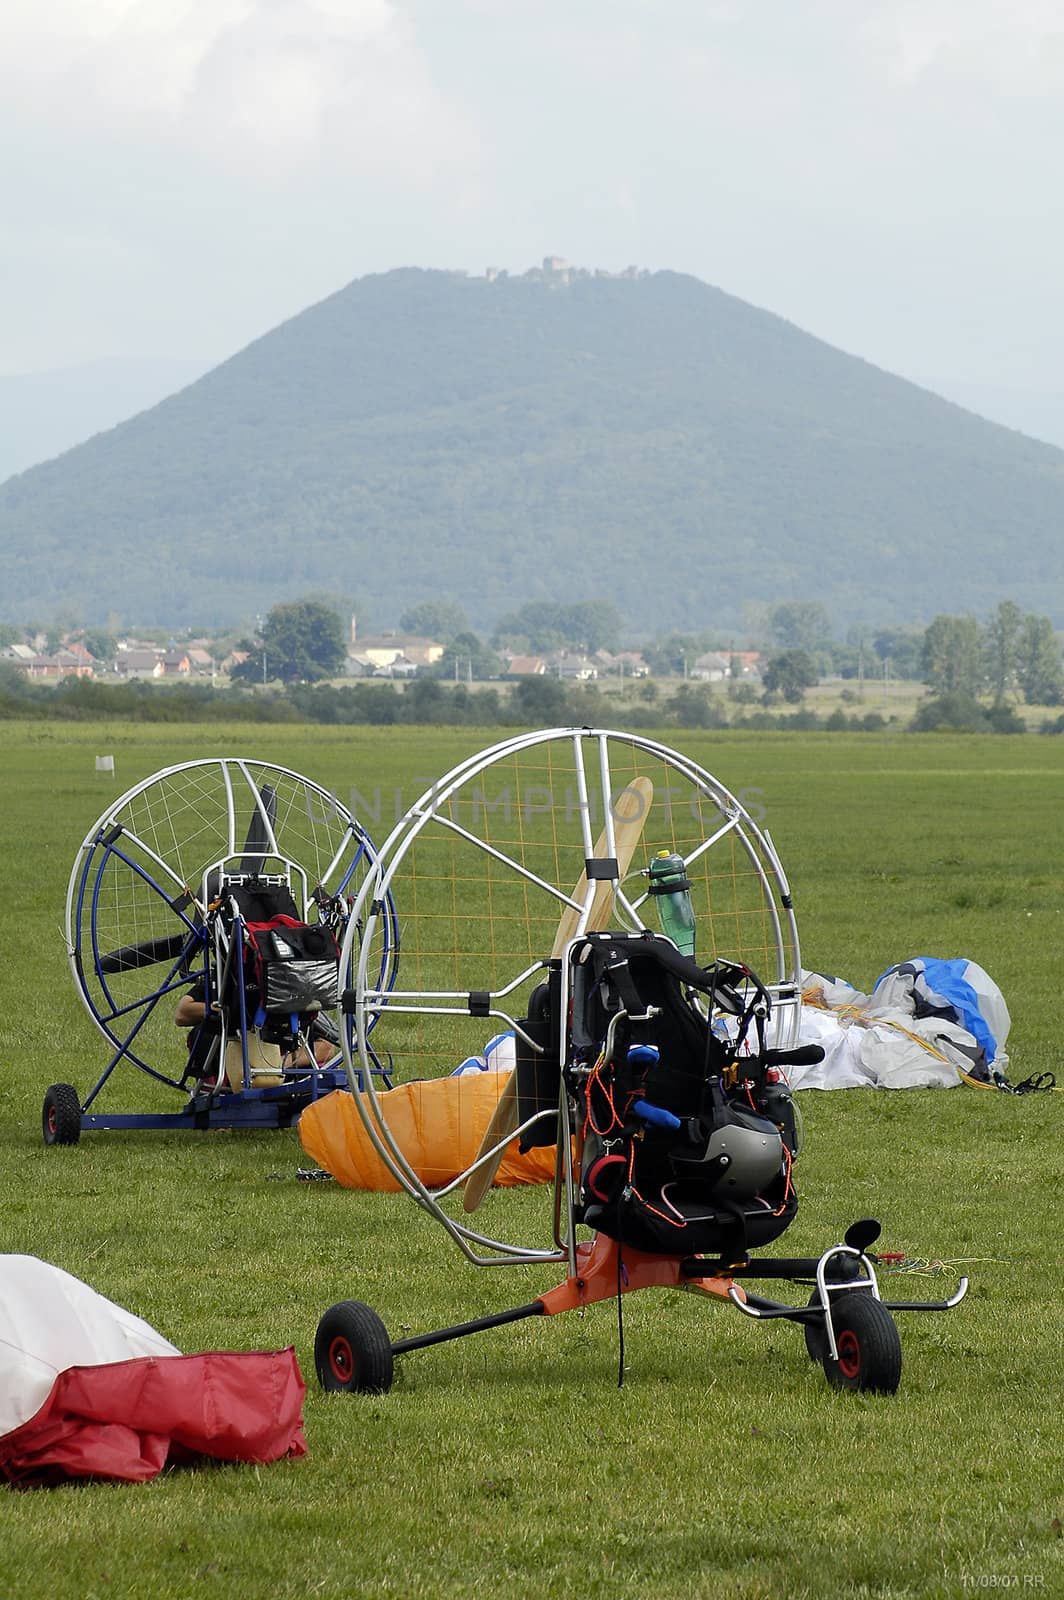 two empty paragliding machines, parachutes, big hill with castle in background